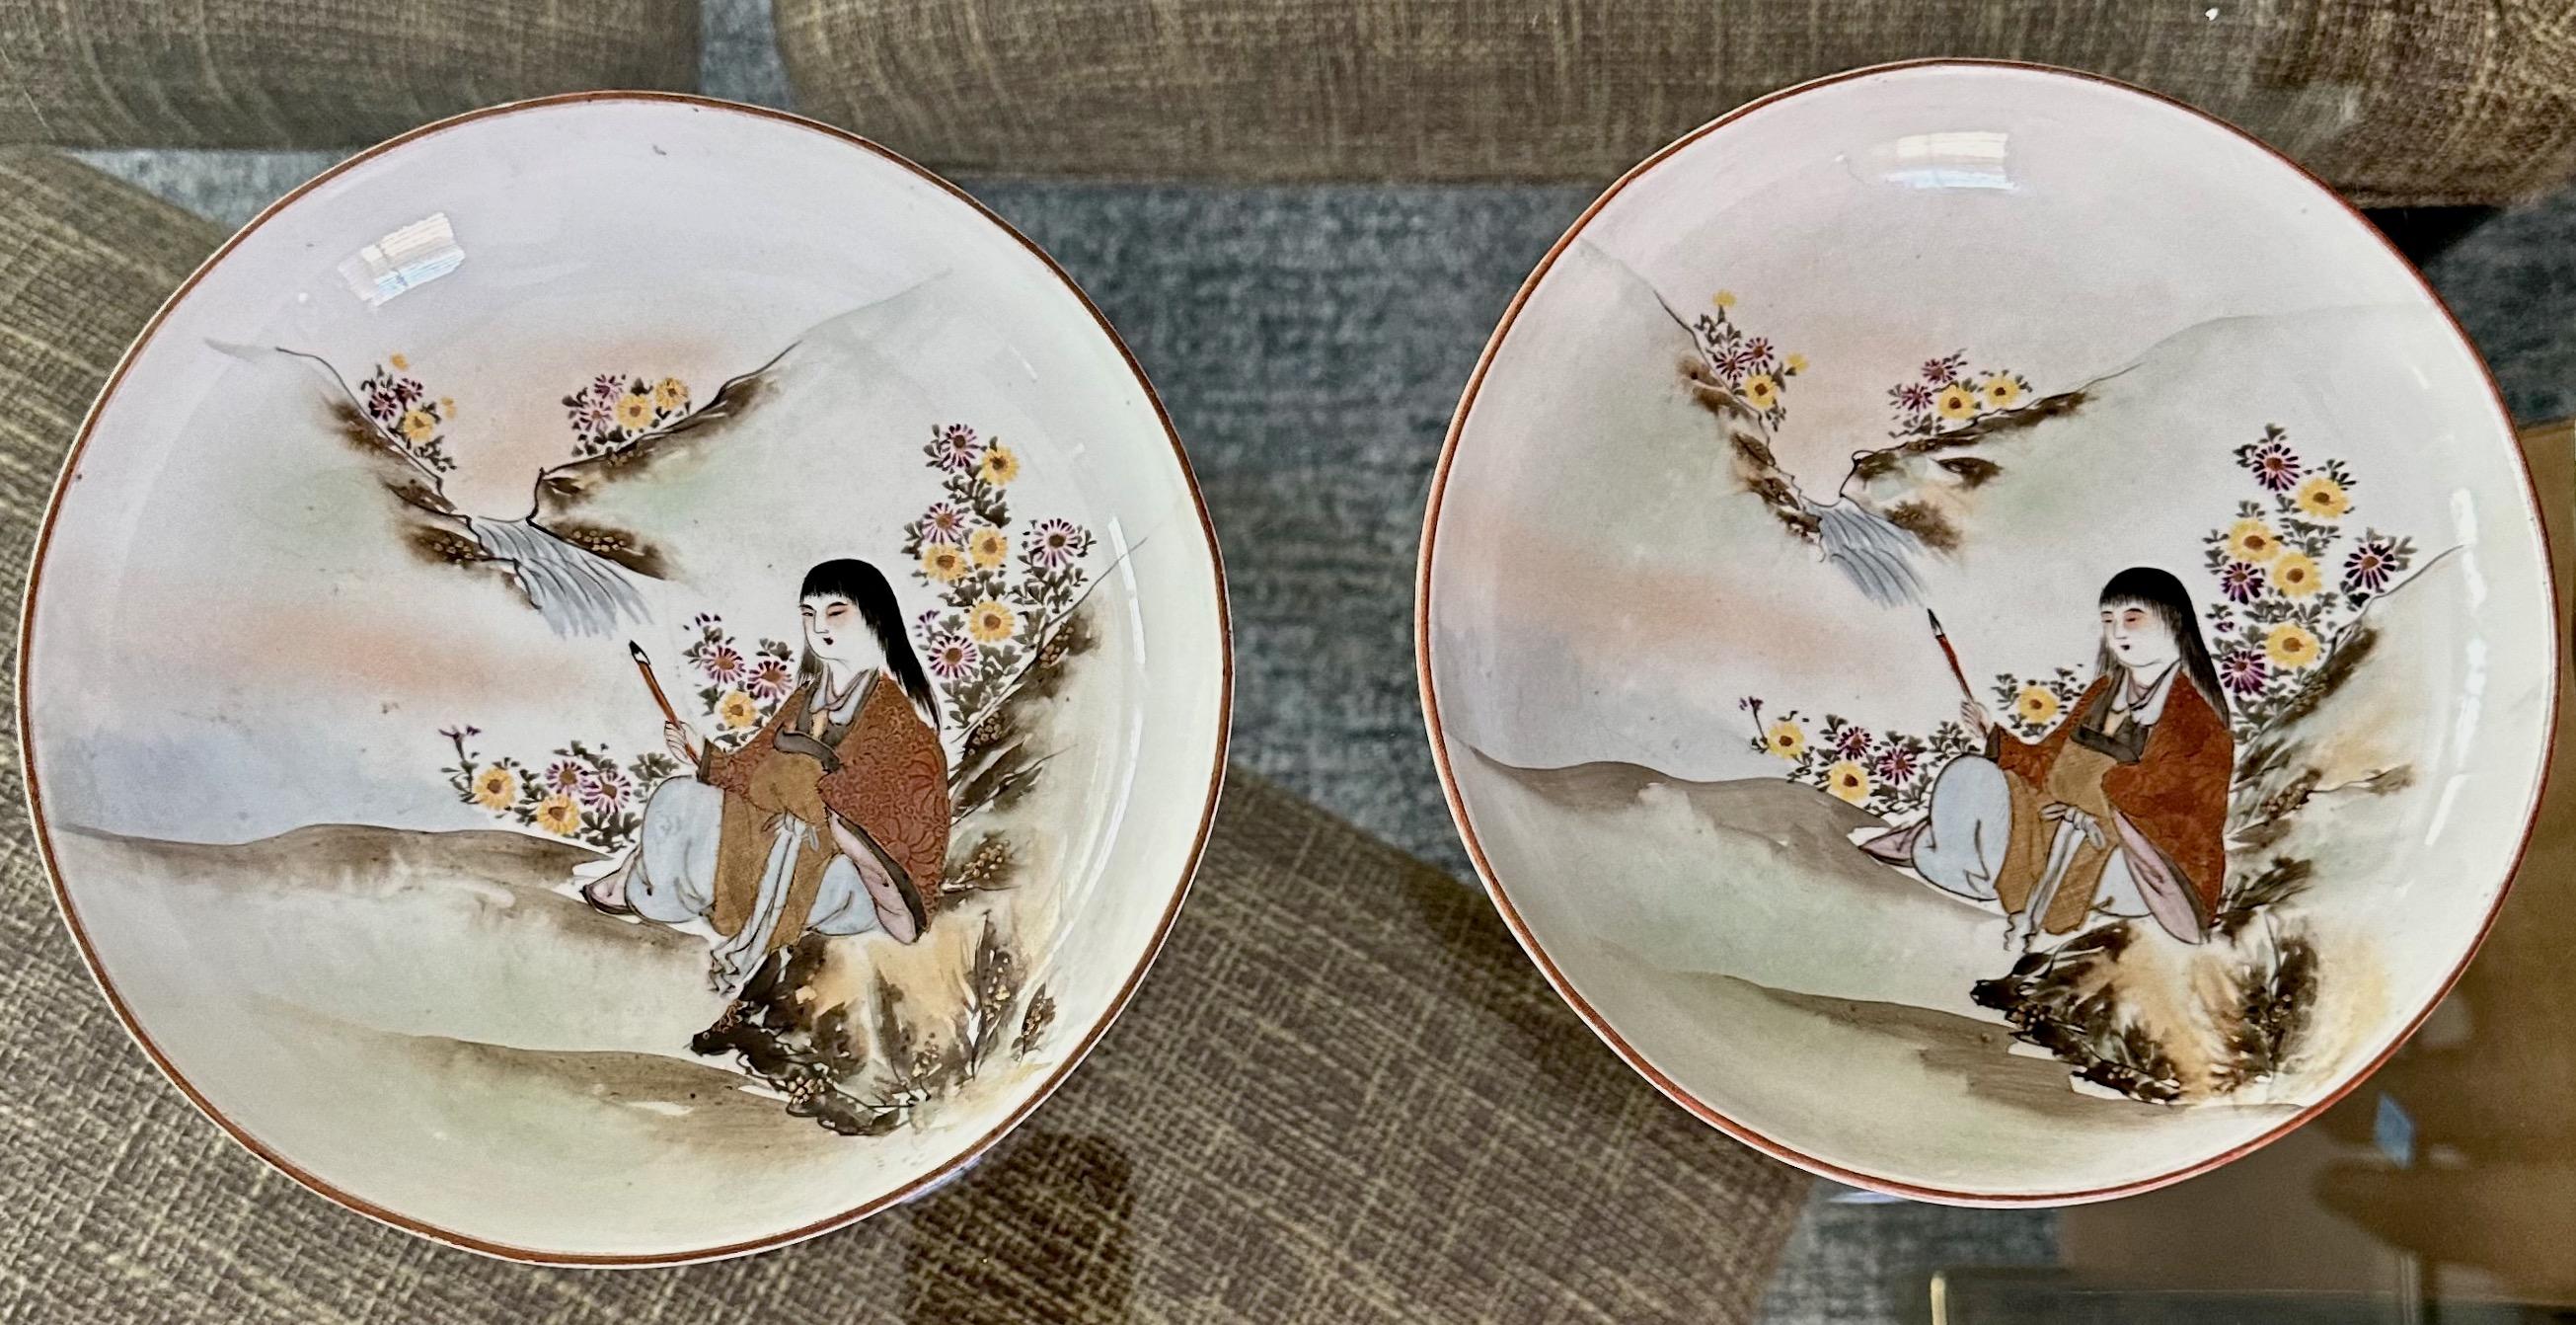 Pair antique Japanese early Meiji period Kutani Tsukuru (made at Kutani) porcelain painted bowls. Embellished with delicately hand painted women in mountain scenery and flowers. The colors are soft and expertly painted. Each woman's robe is painted